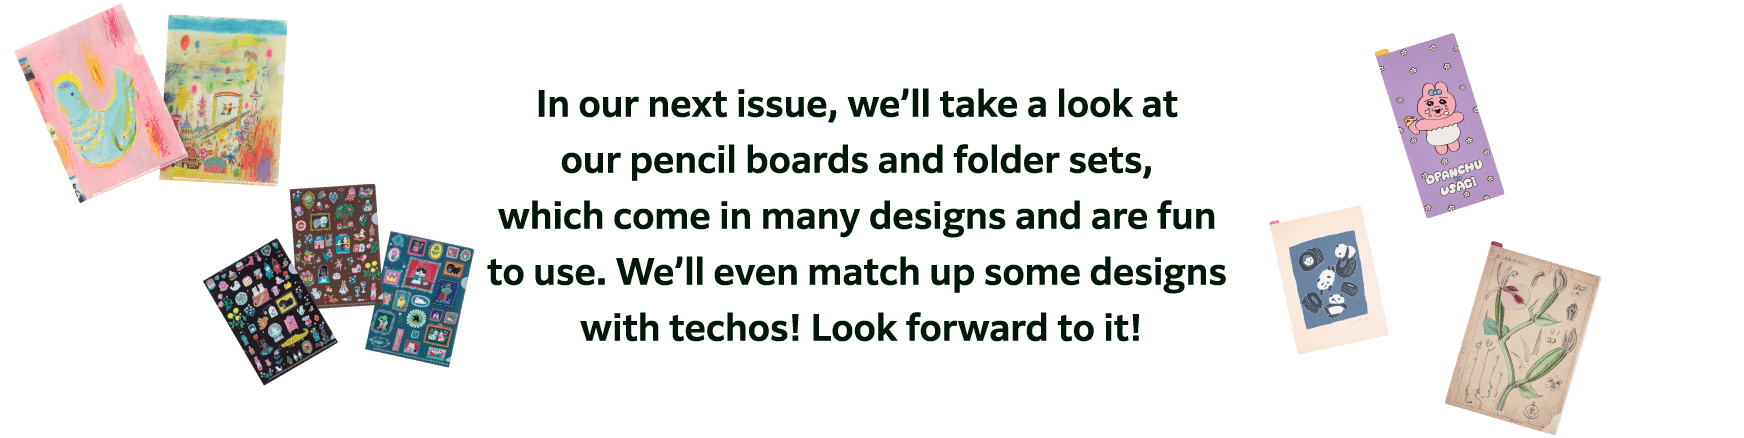 In our next issue, we’ll take a look at our pencil boards and folder sets, which come in many designs and are fun to use. We’ll even match up some designs with techos! Look forward to it!